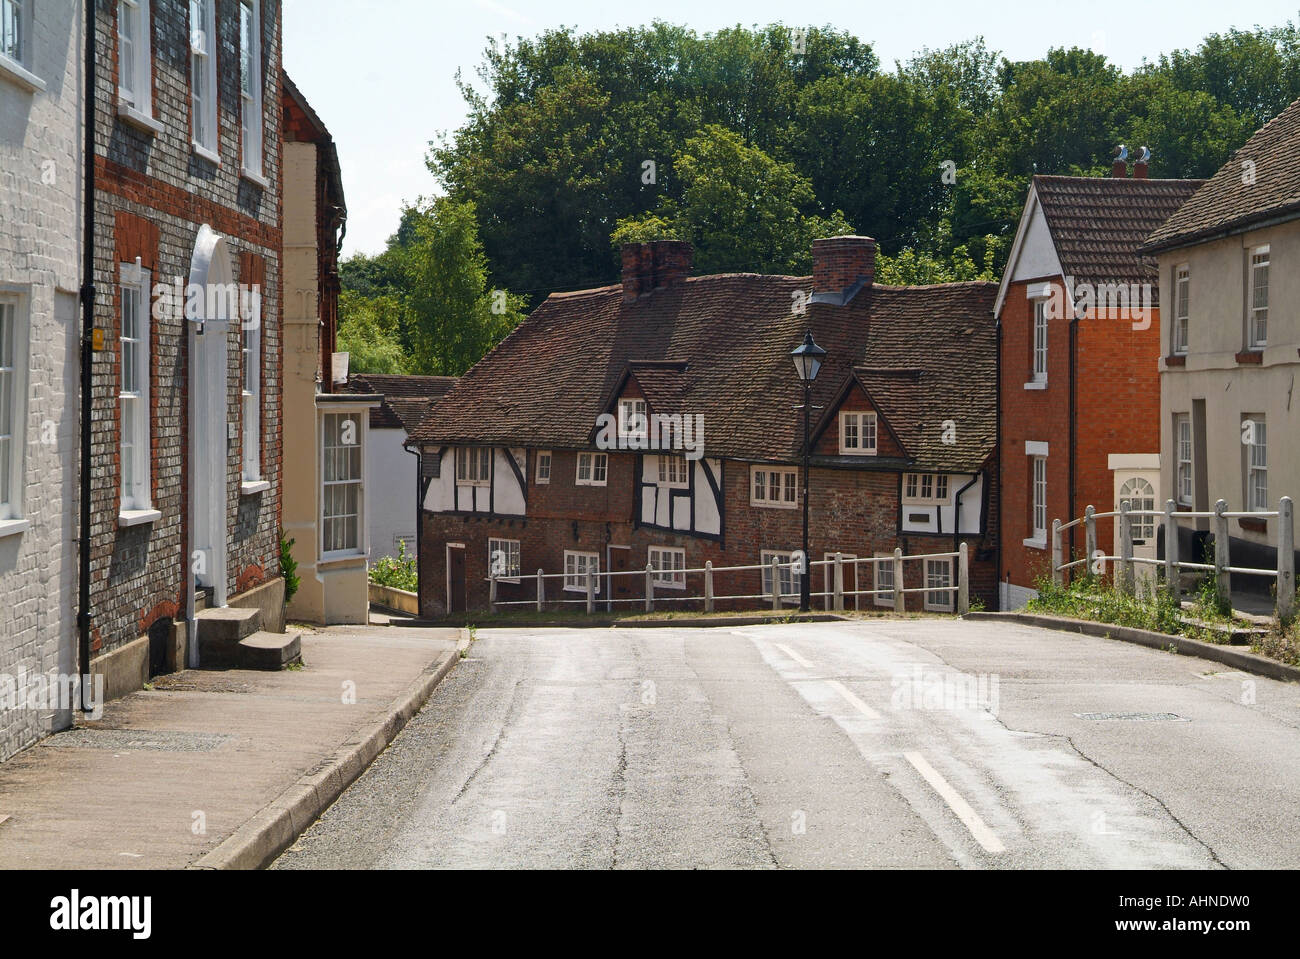 Street scene with historic old buildings, Wickham, Hampshire, Southern England, Stock Photo